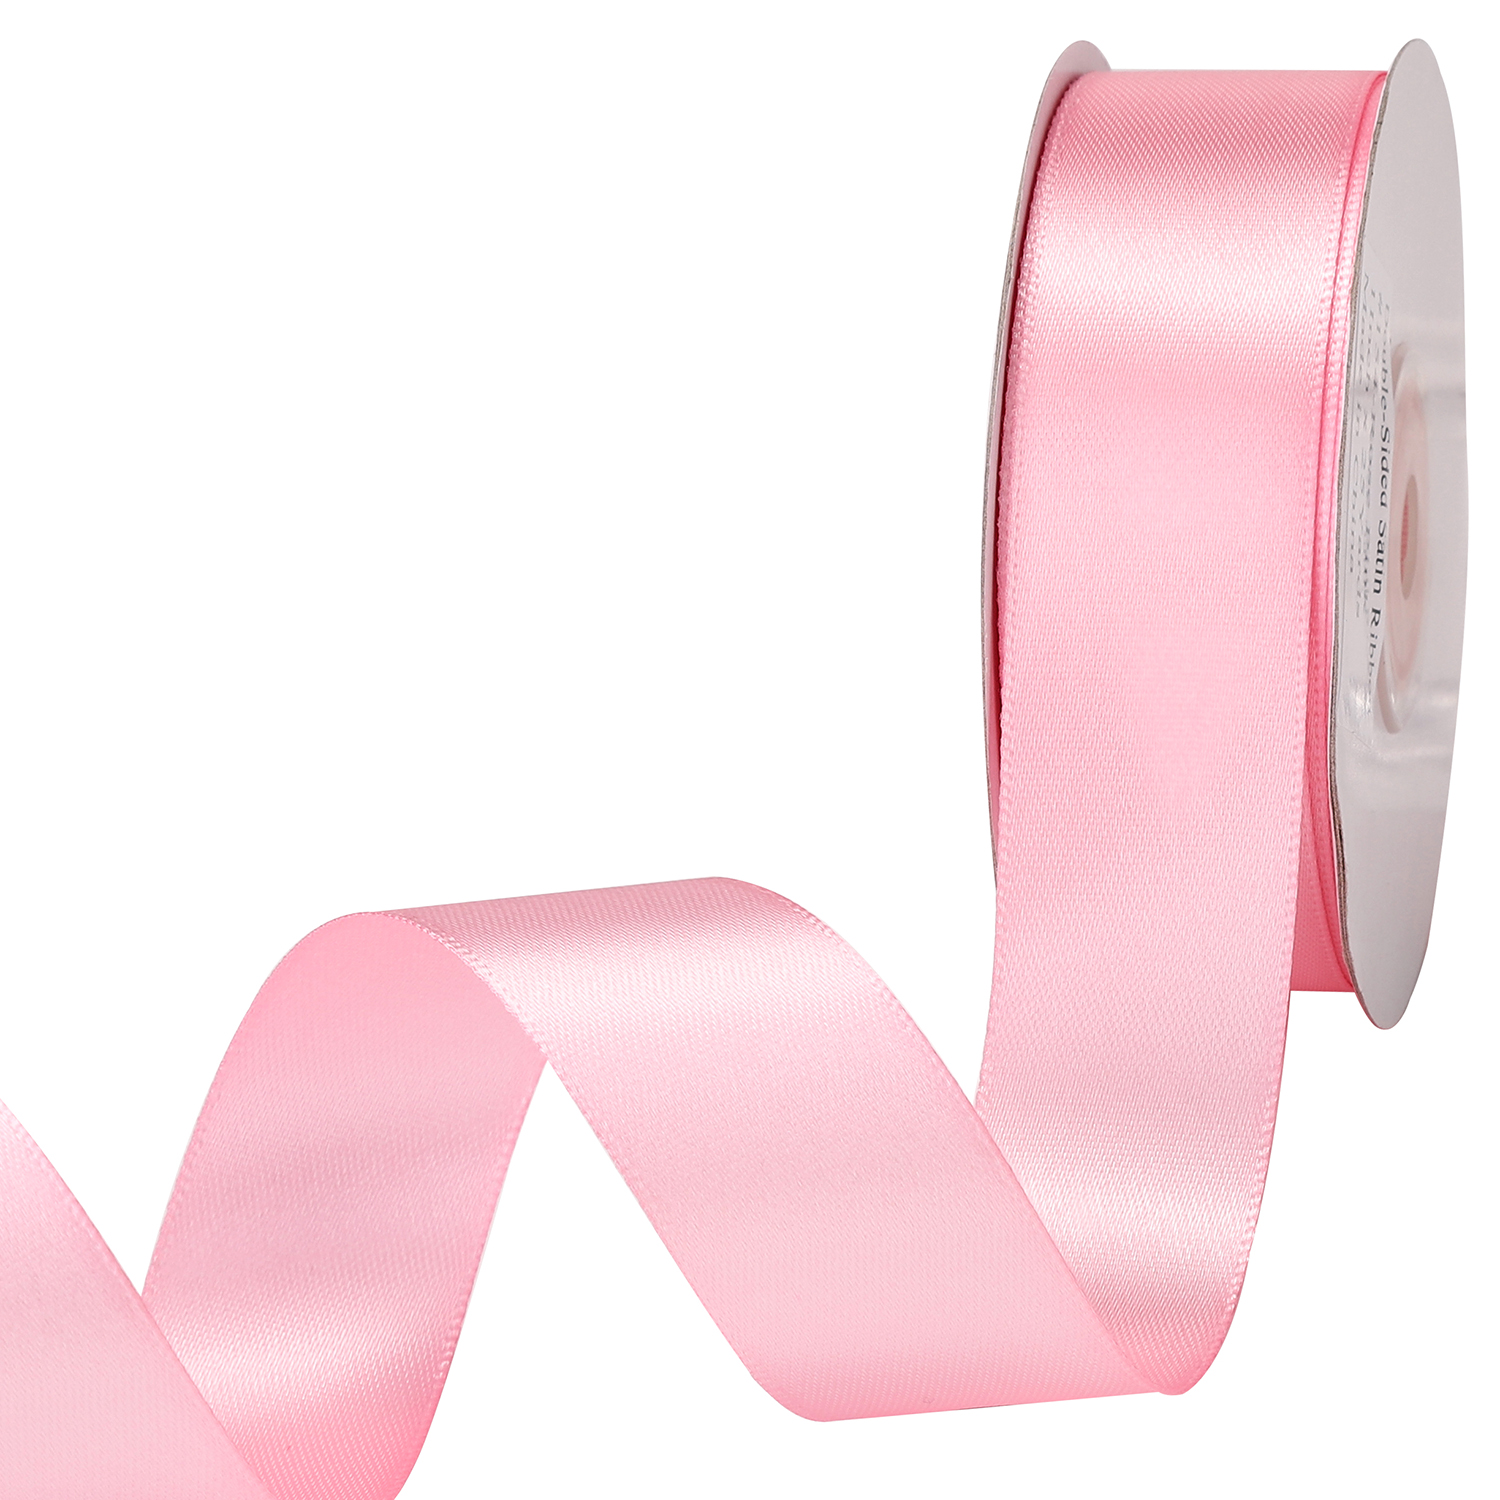  Pink Ribbon 1-1/2 Inch x 25 Yards, Solid Color Fabric